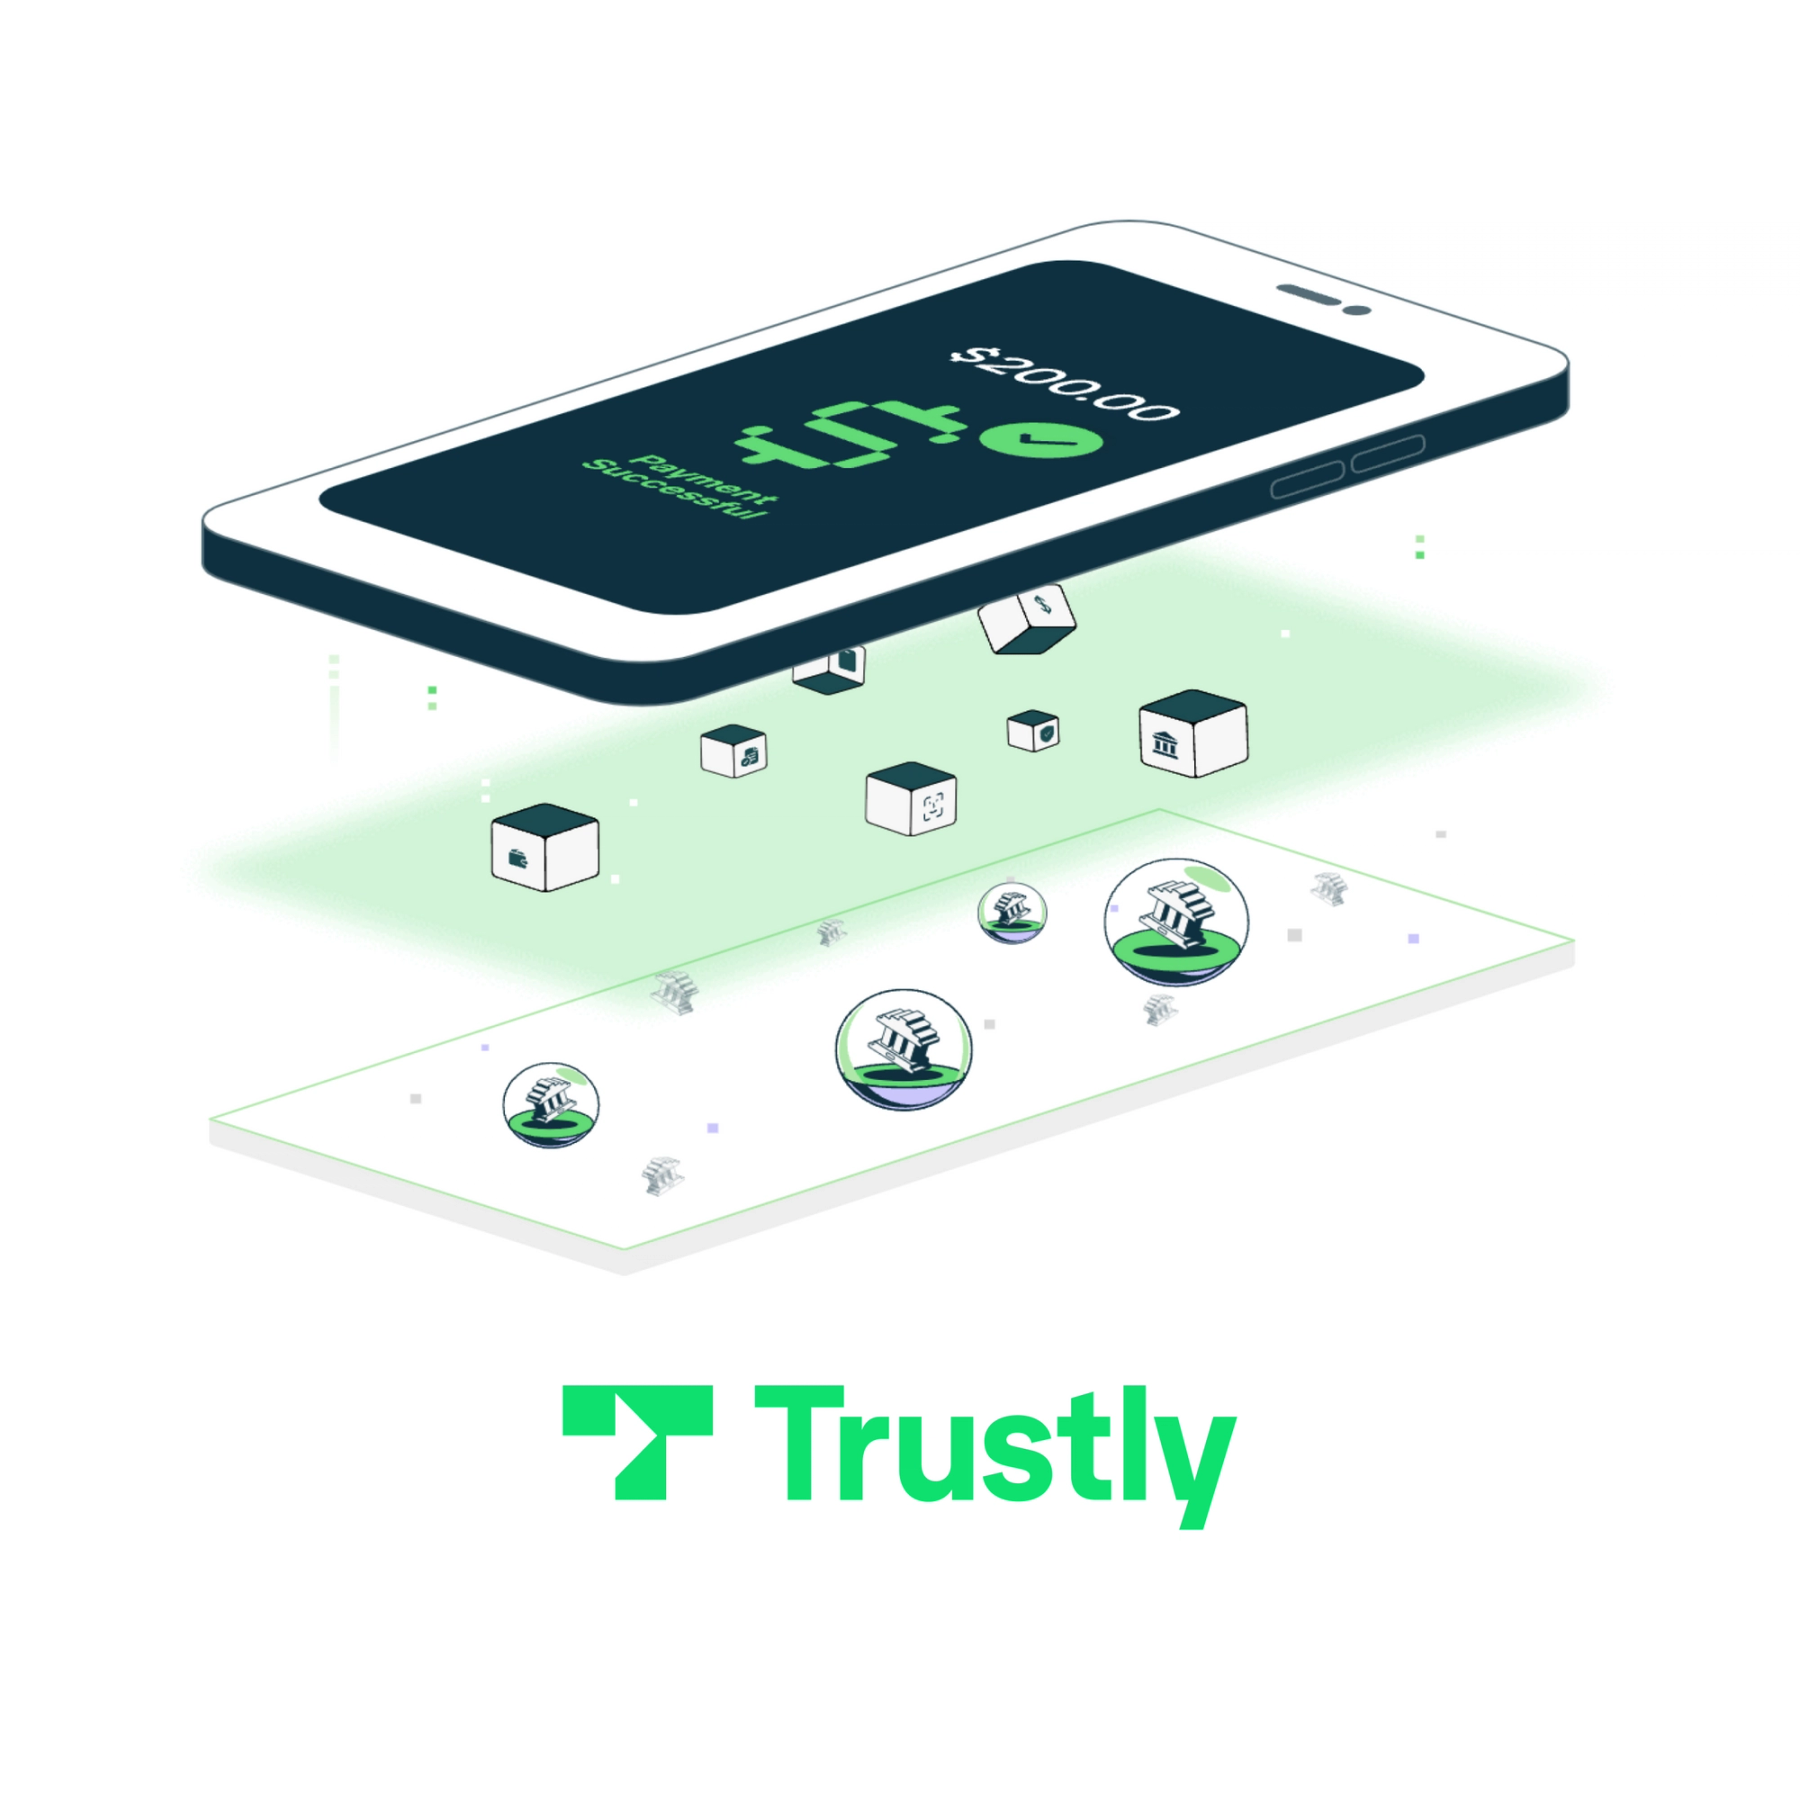 Trustly Graphic